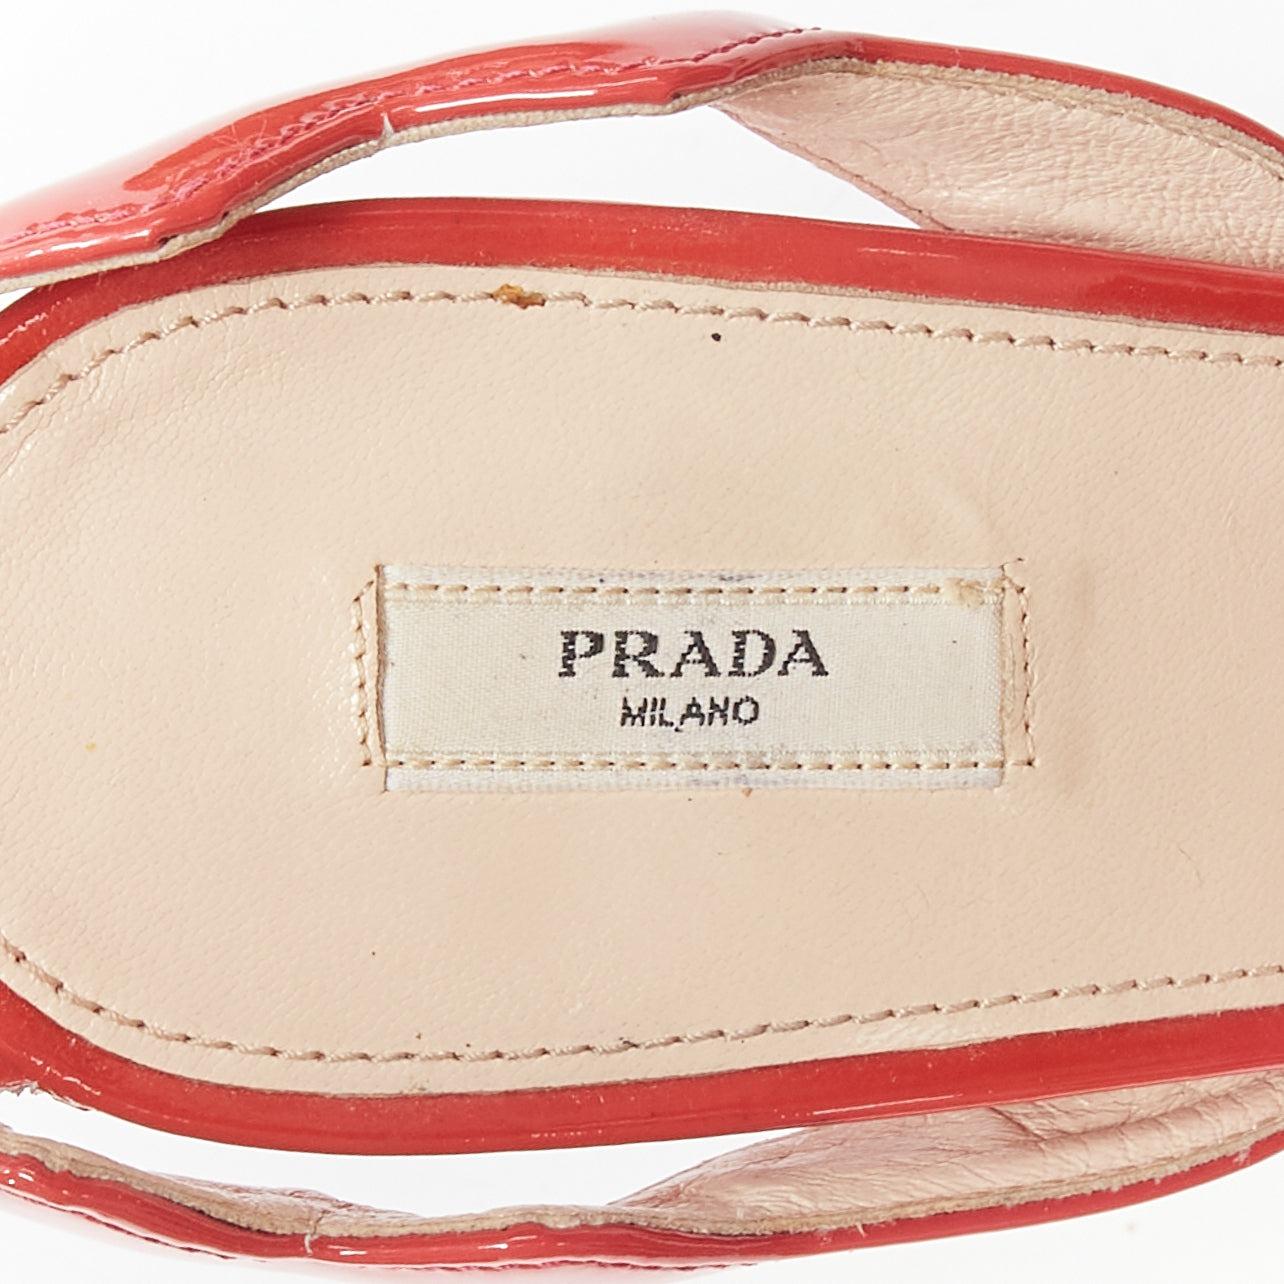 PRADA rose pink patent leather squiggly strap sandal heels EU38.5 For Sale 5